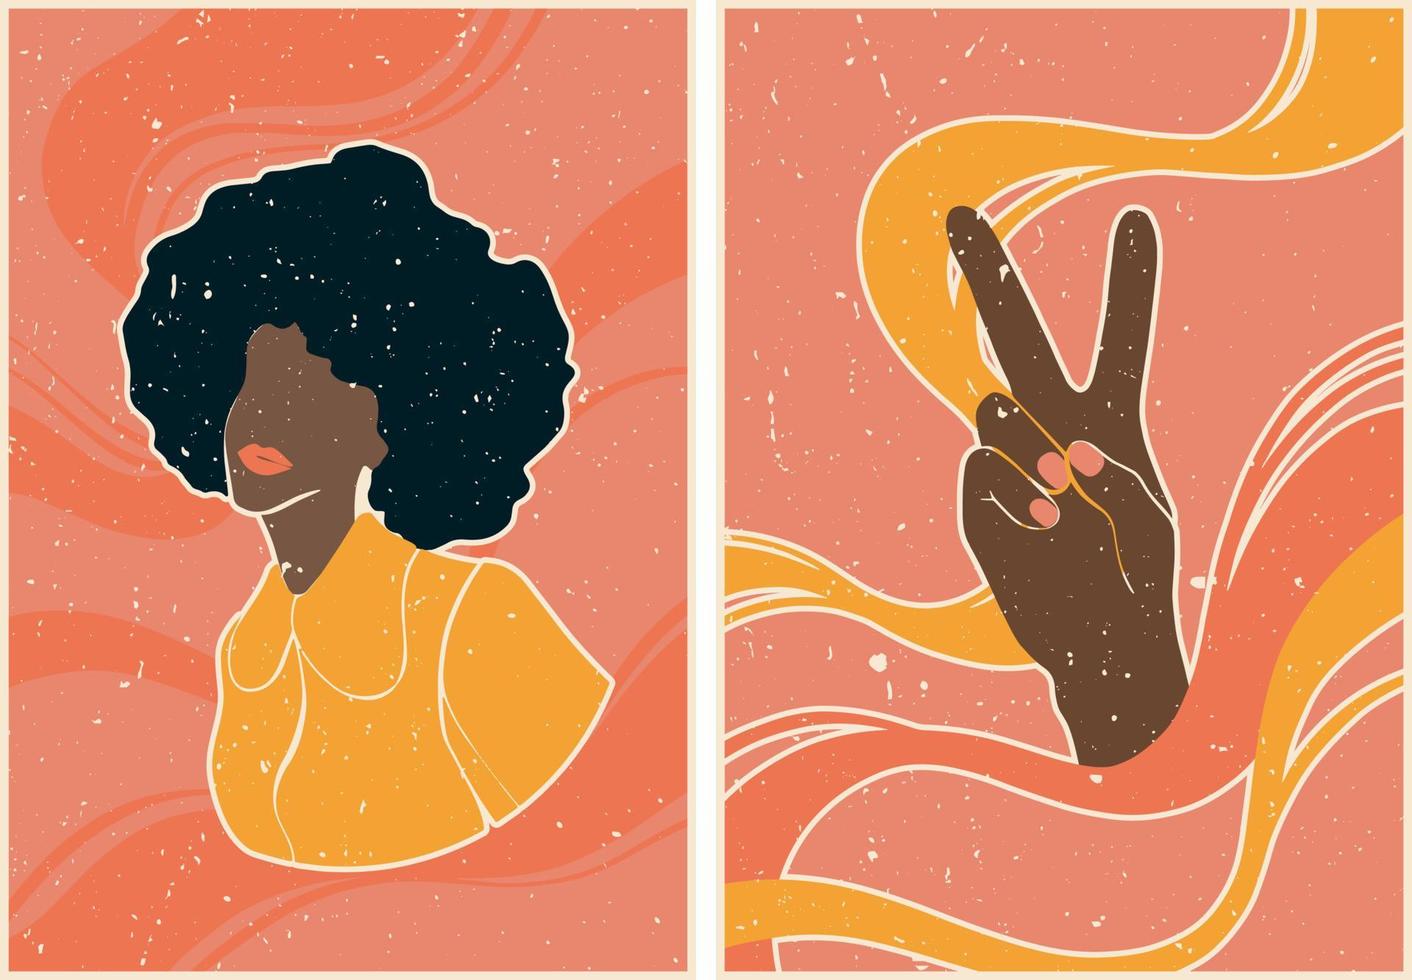 Set of posters in retro style with young frican woman and peace sign with hands. Posters on the background of abstract waves. Psychedelic wallpaper. 60s, 70s, hippies. Postcard set, poster design. vector